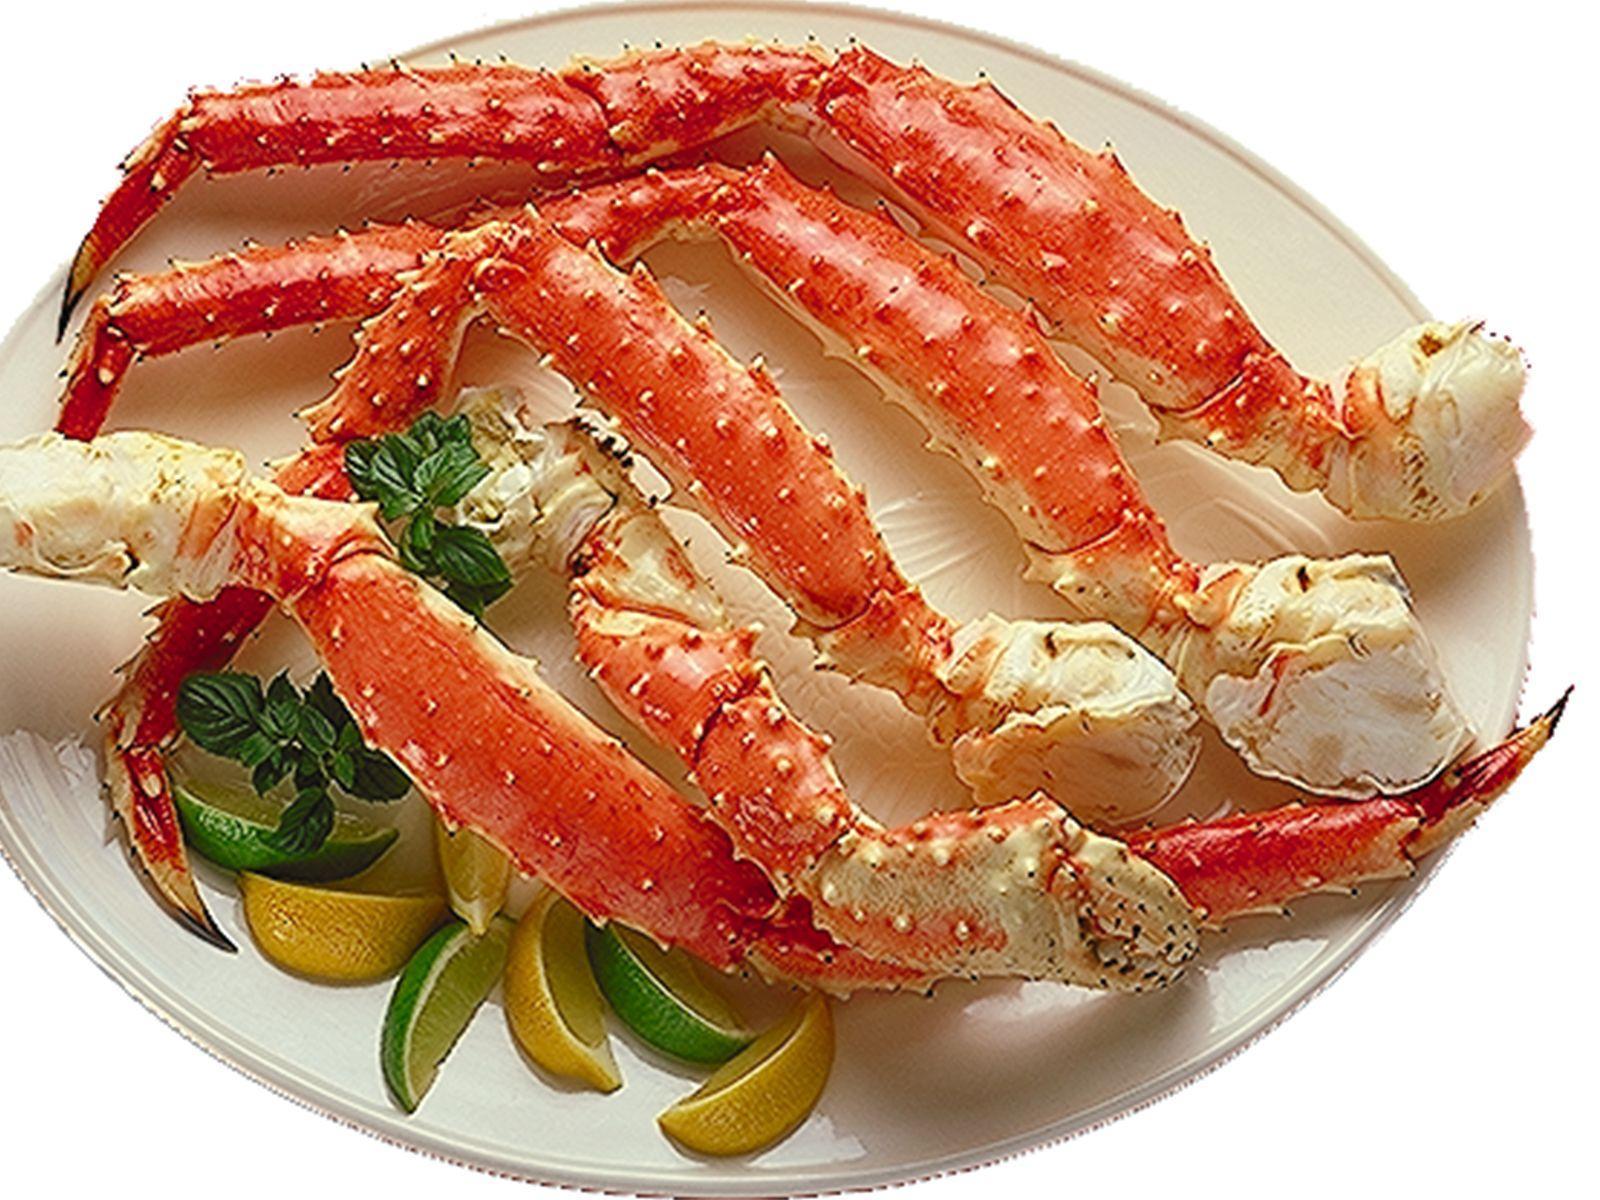 Red King Crab Legs & Claws 14 17 Count (20 Lb) 412785